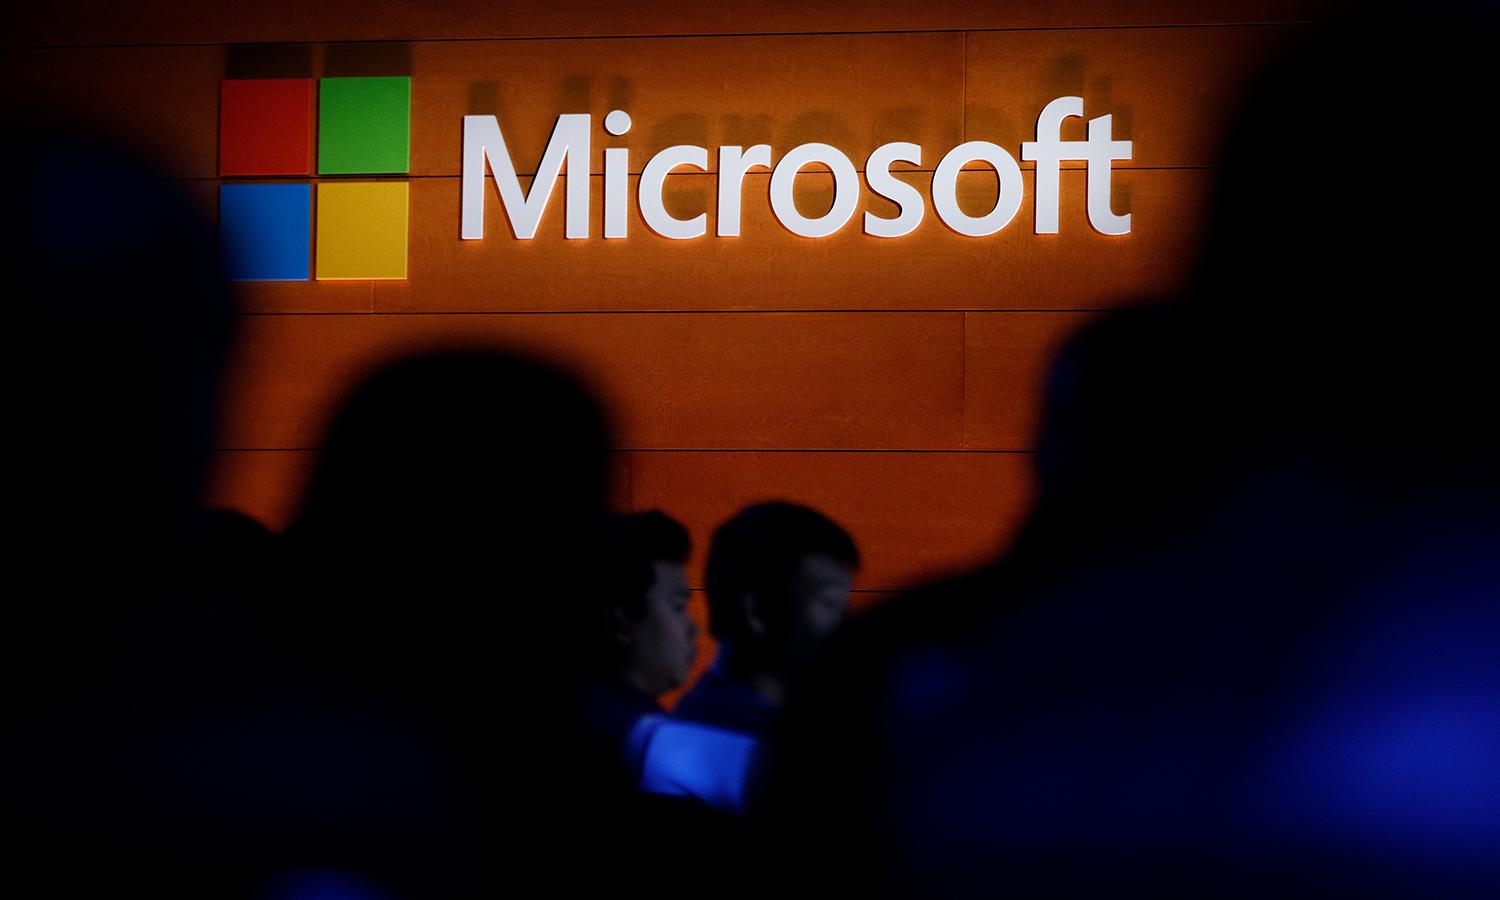 The Microsoft logo is illuminated on a wall during a Microsoft launch event